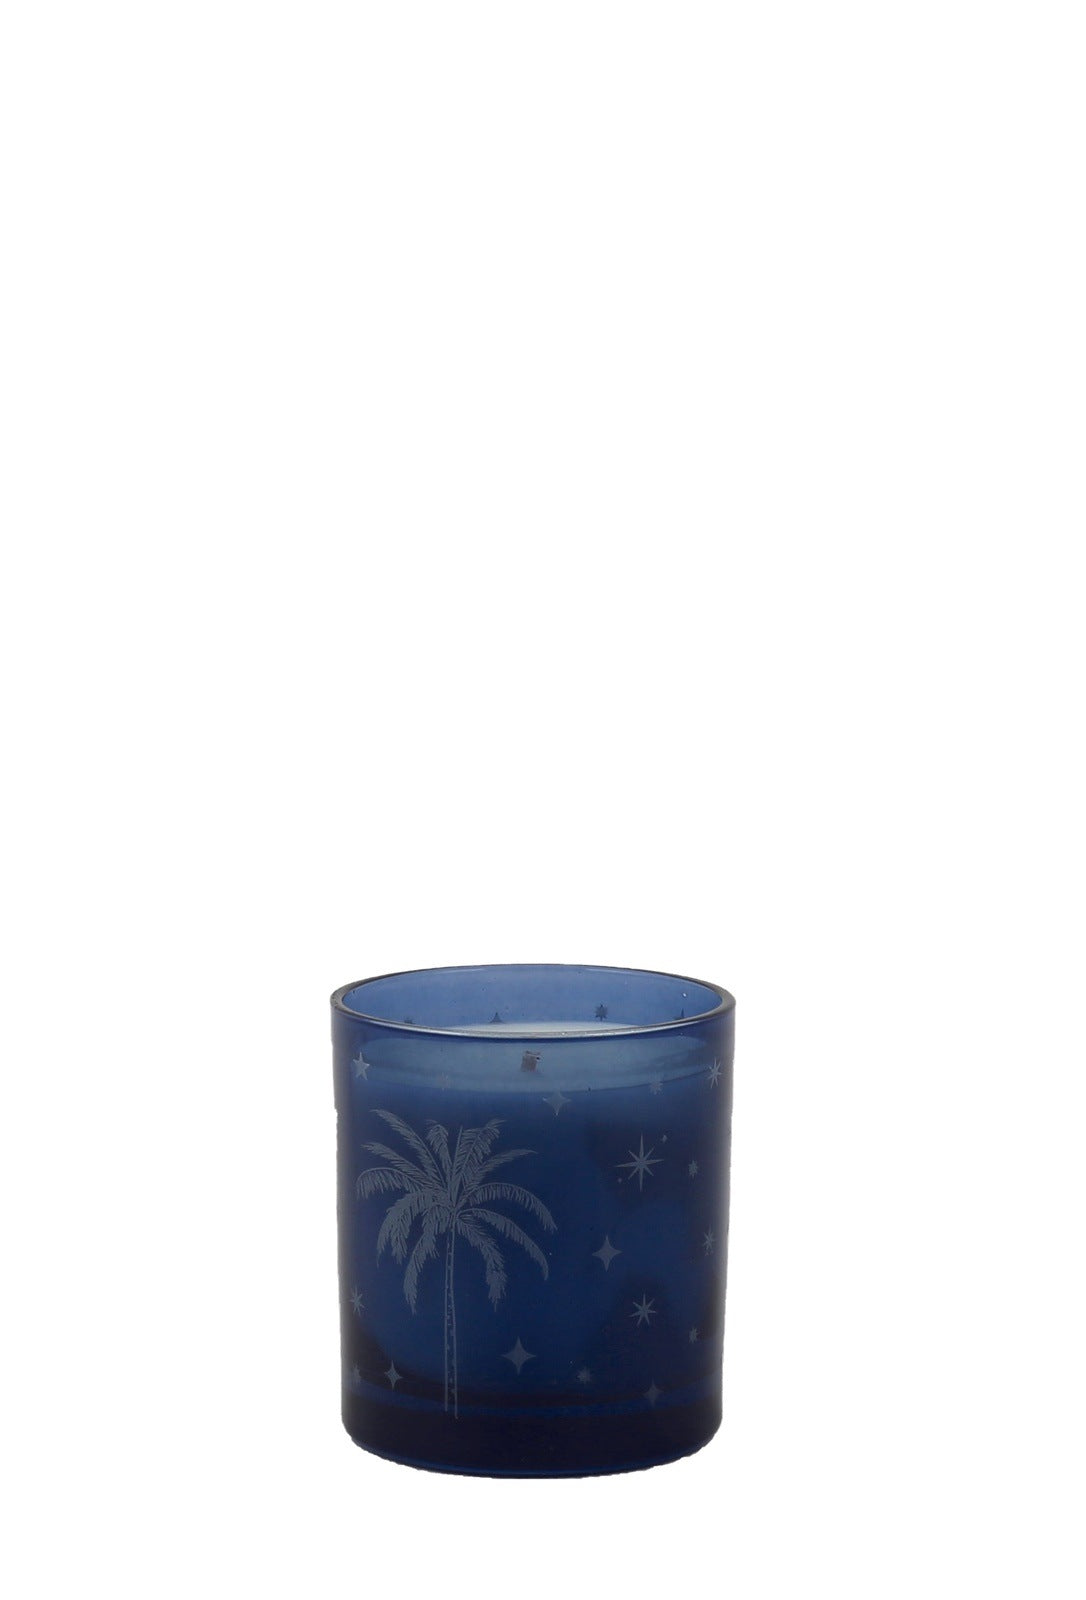 Rakel Palm Print Candle in glass jar single - Blue 1 Shaws Department Stores